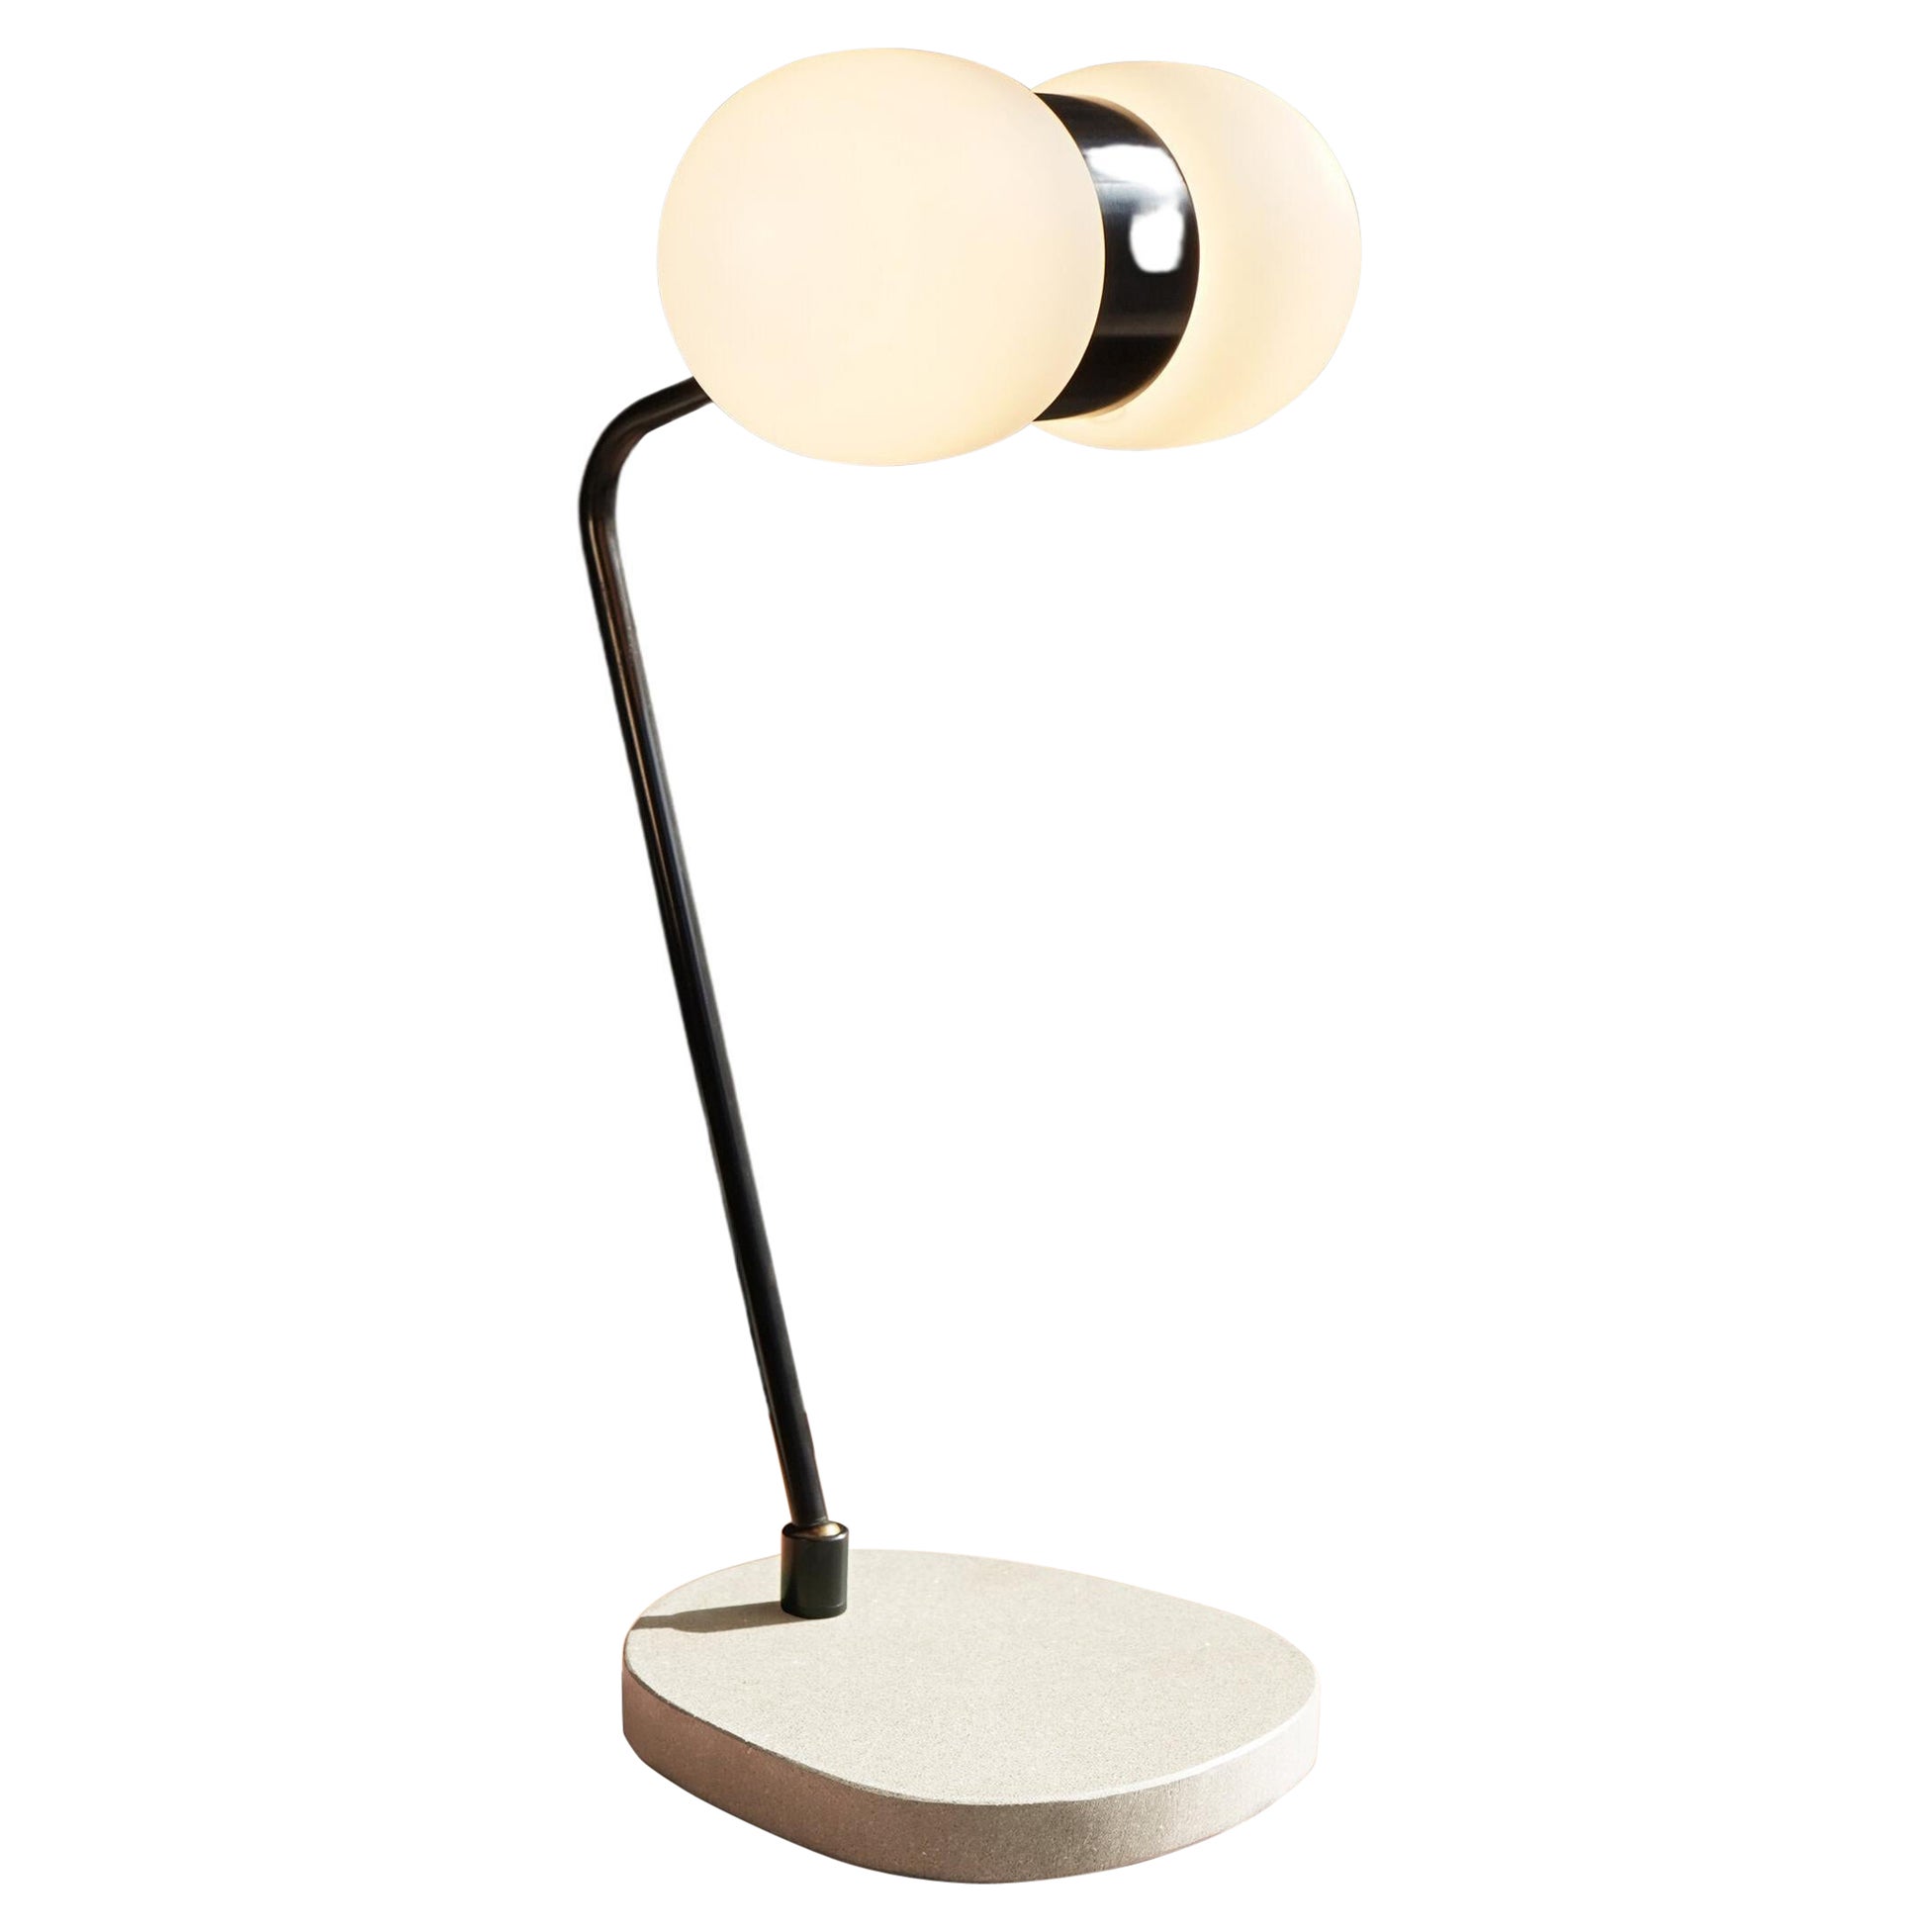 Nuvol Double Table Lamp by Contain